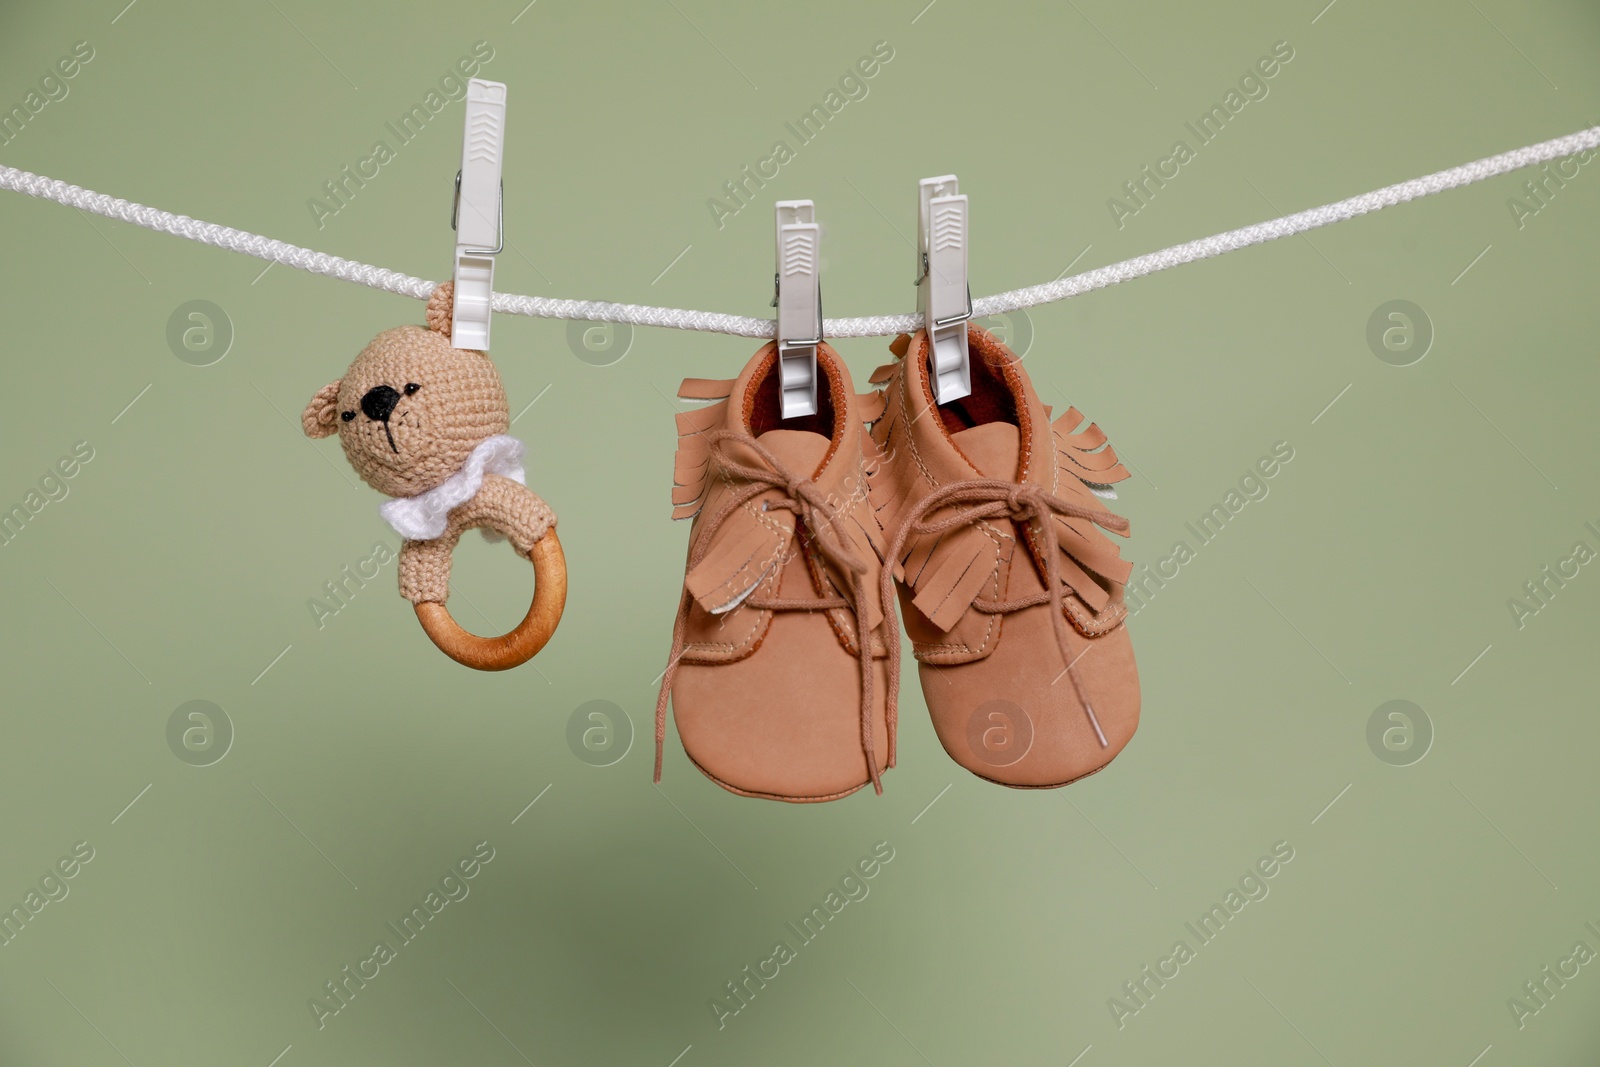 Photo of Cute small baby shoes and toy hanging on washing line against green background